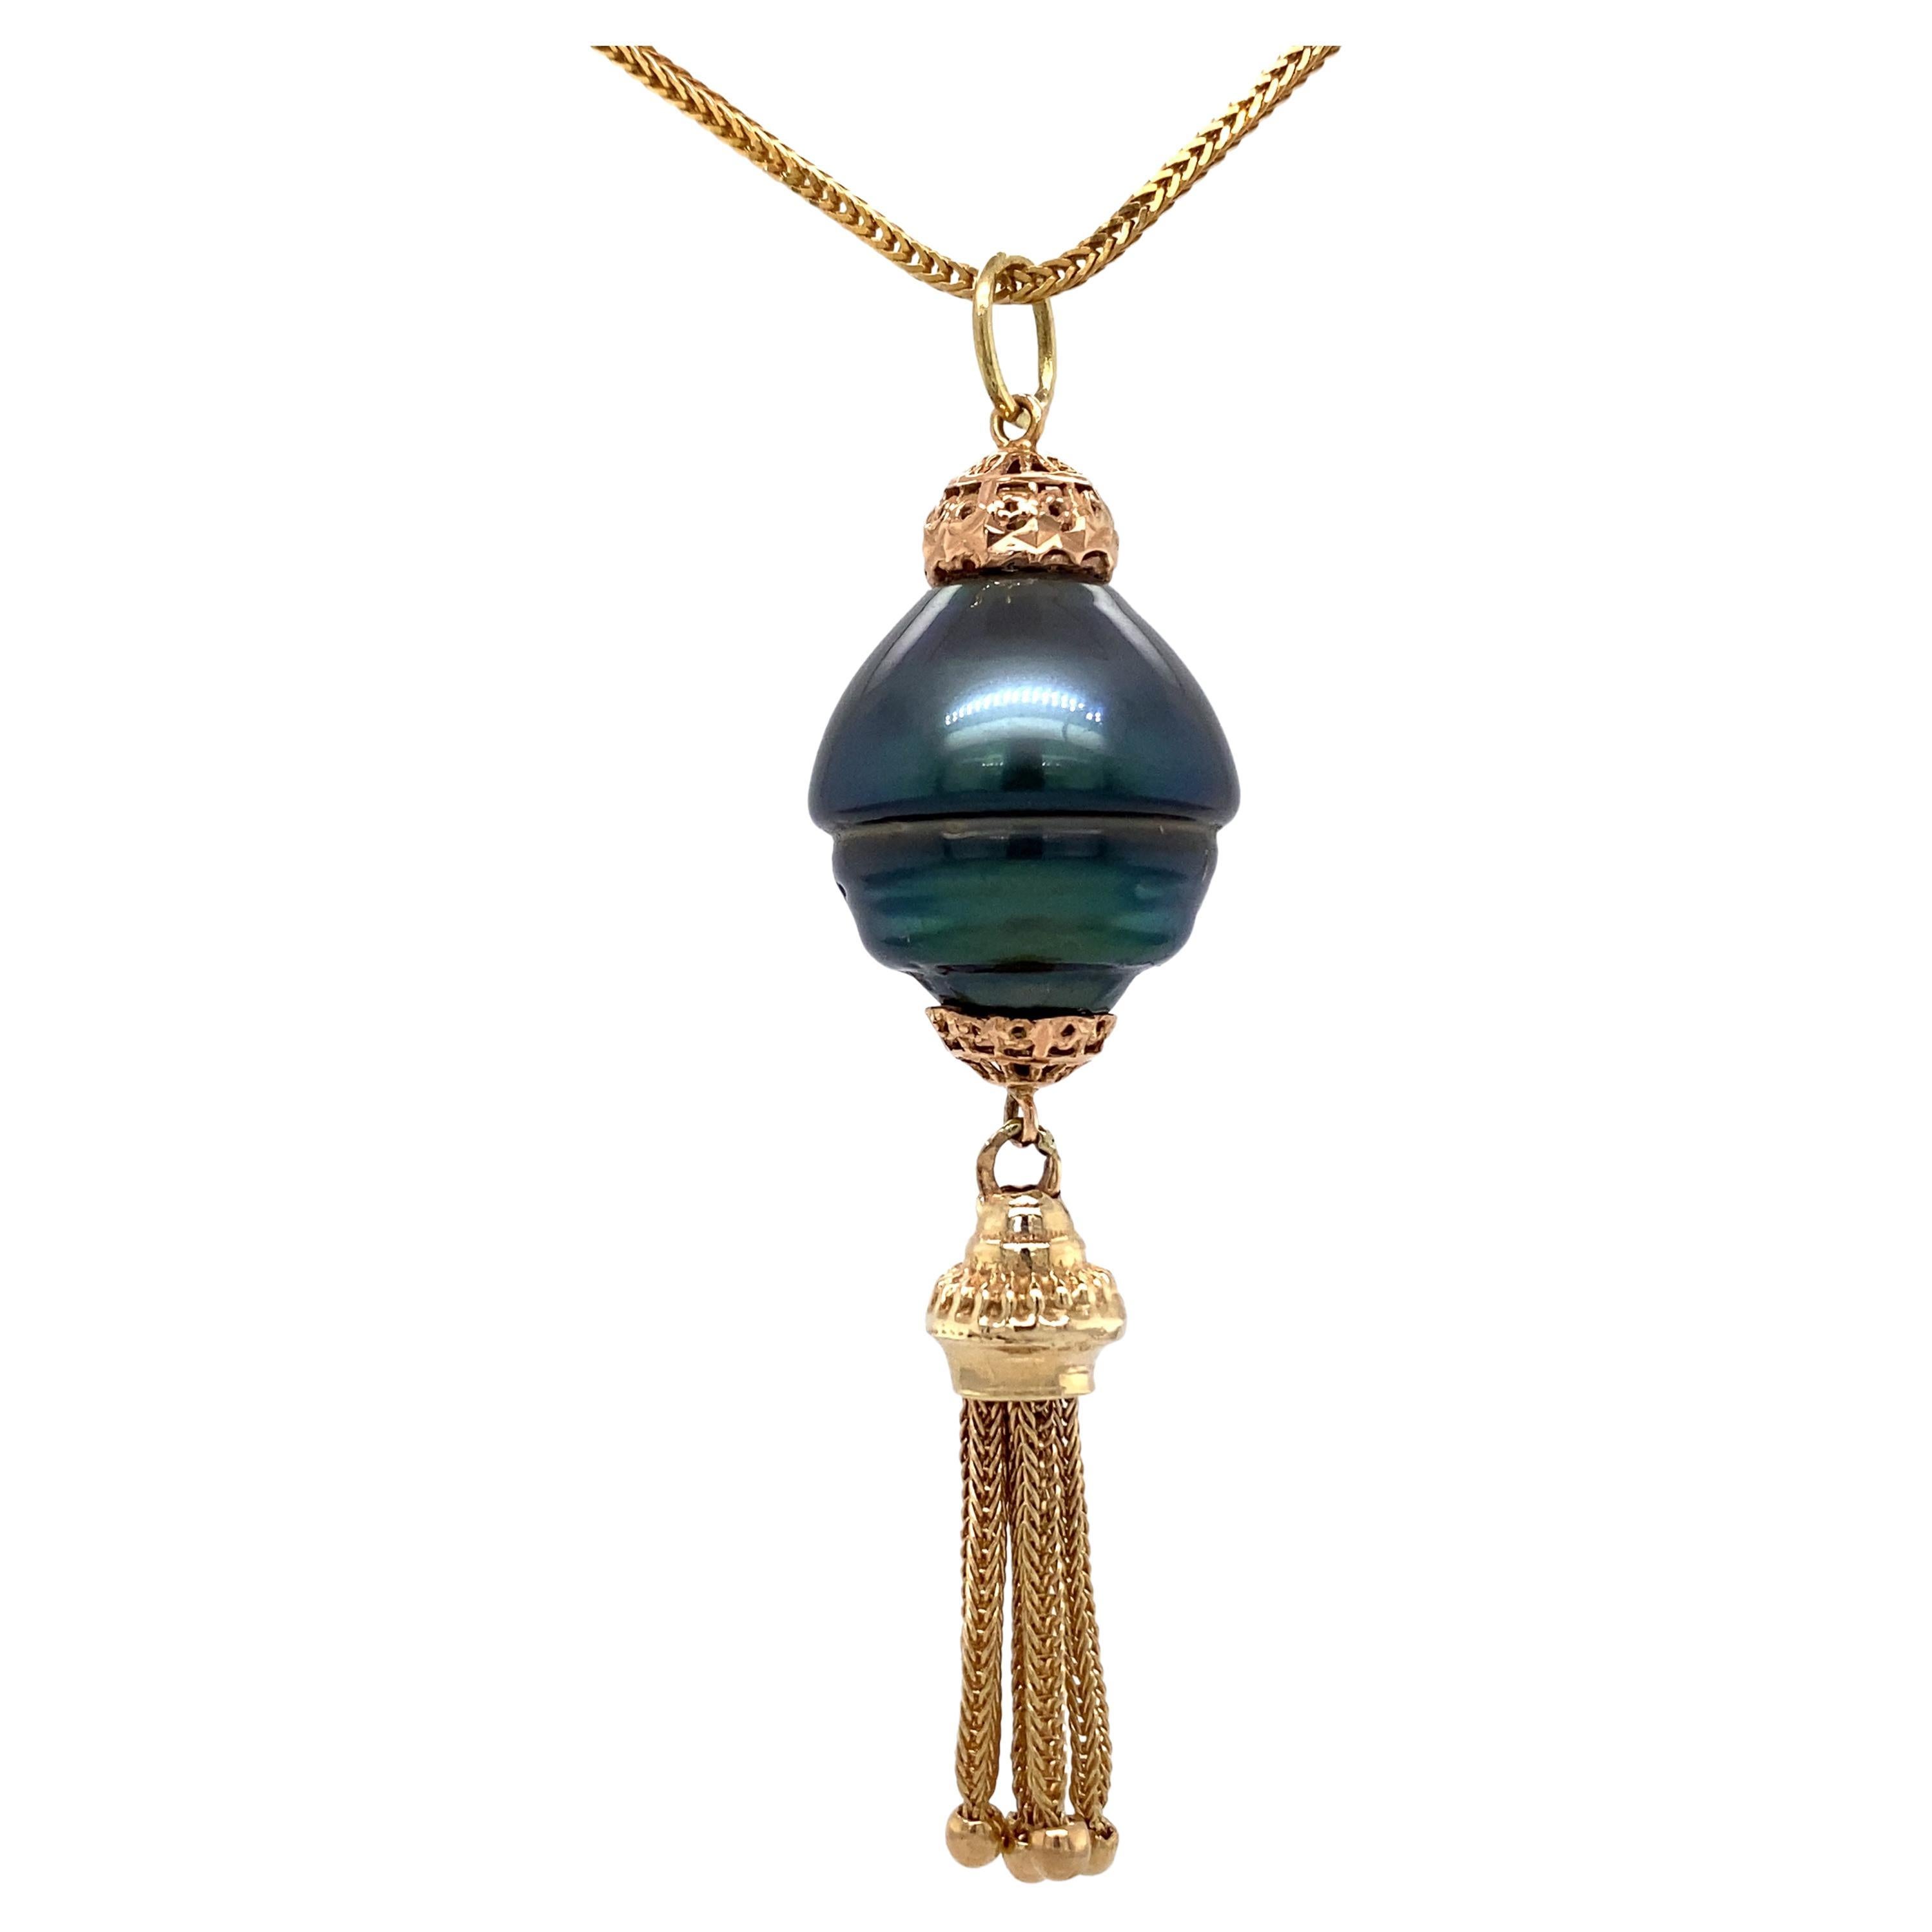 "Chinese Lantern" Tahitian Pearl Tassel Fob in 14k & 18k Gold with Chain